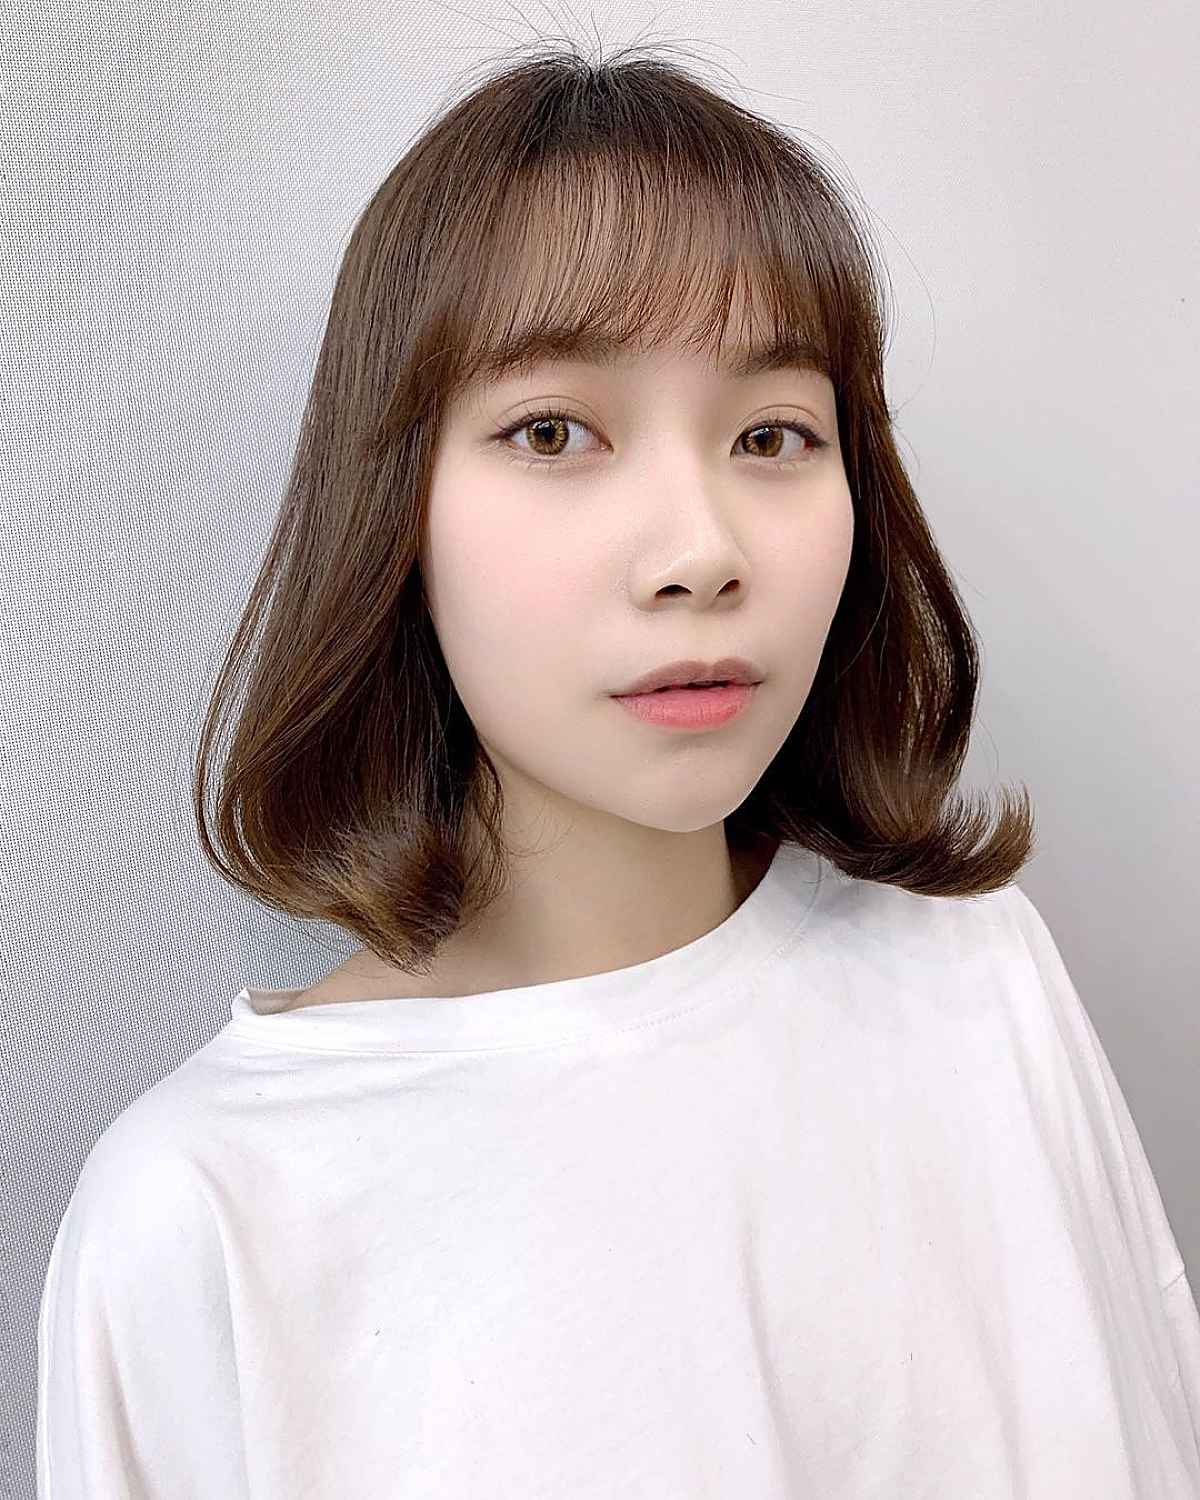 Mid-Length Cut with See-Through Bangs